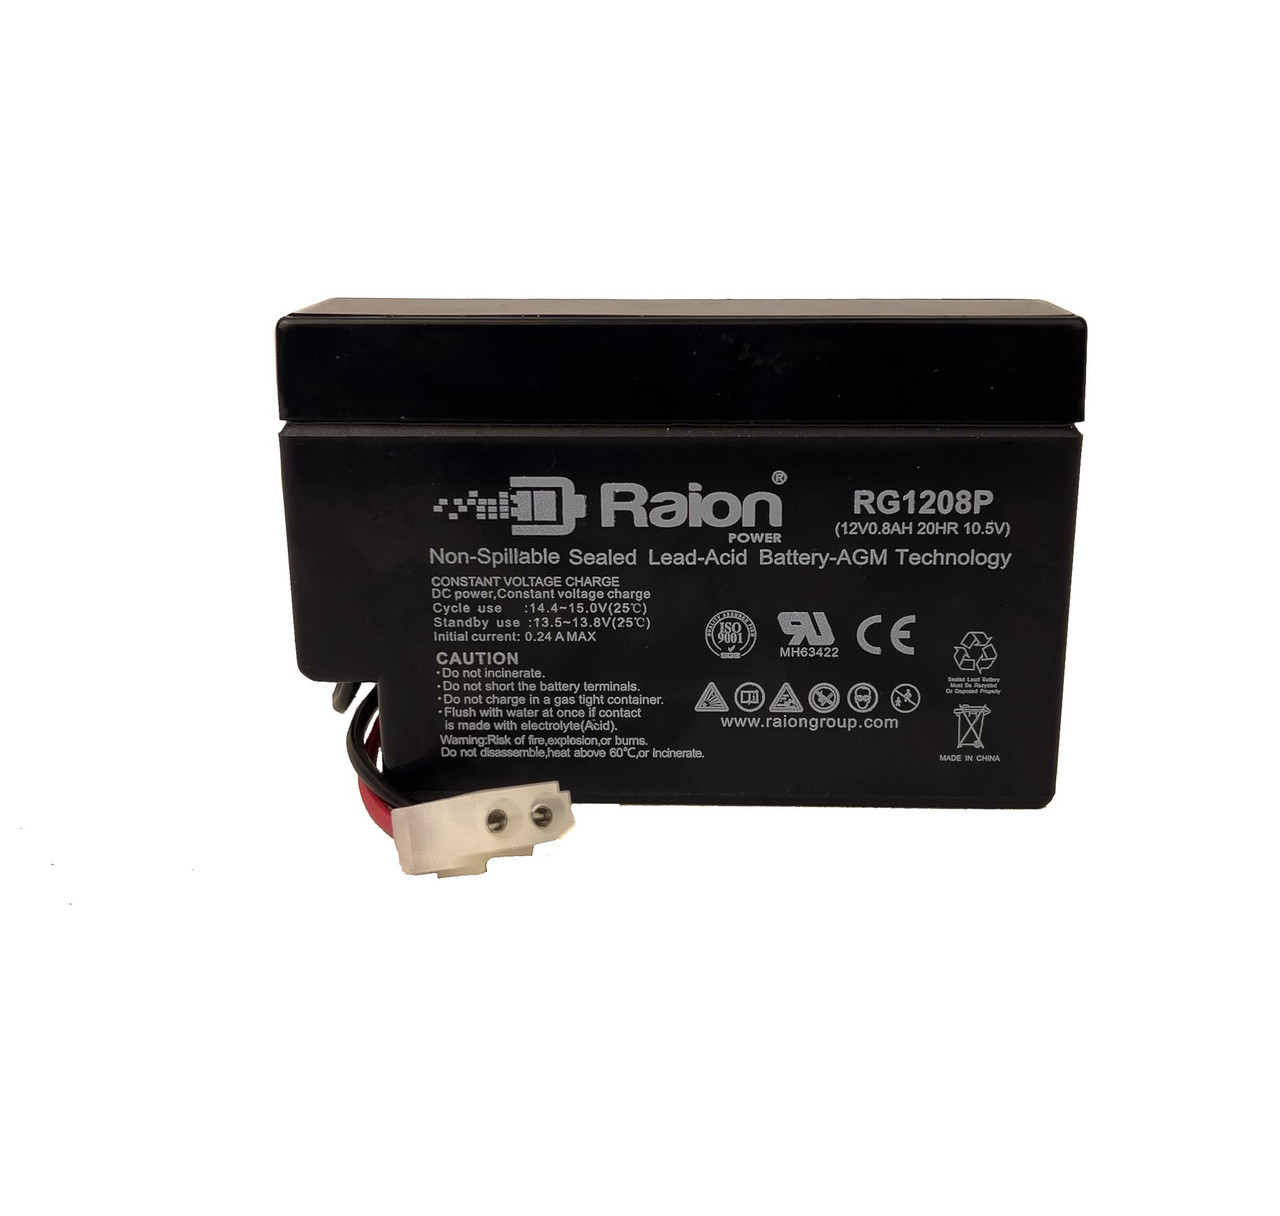 Raion Power 12V 0.8Ah SLA Battery With T1 Terminals For Duracell DURA12-0.8WL